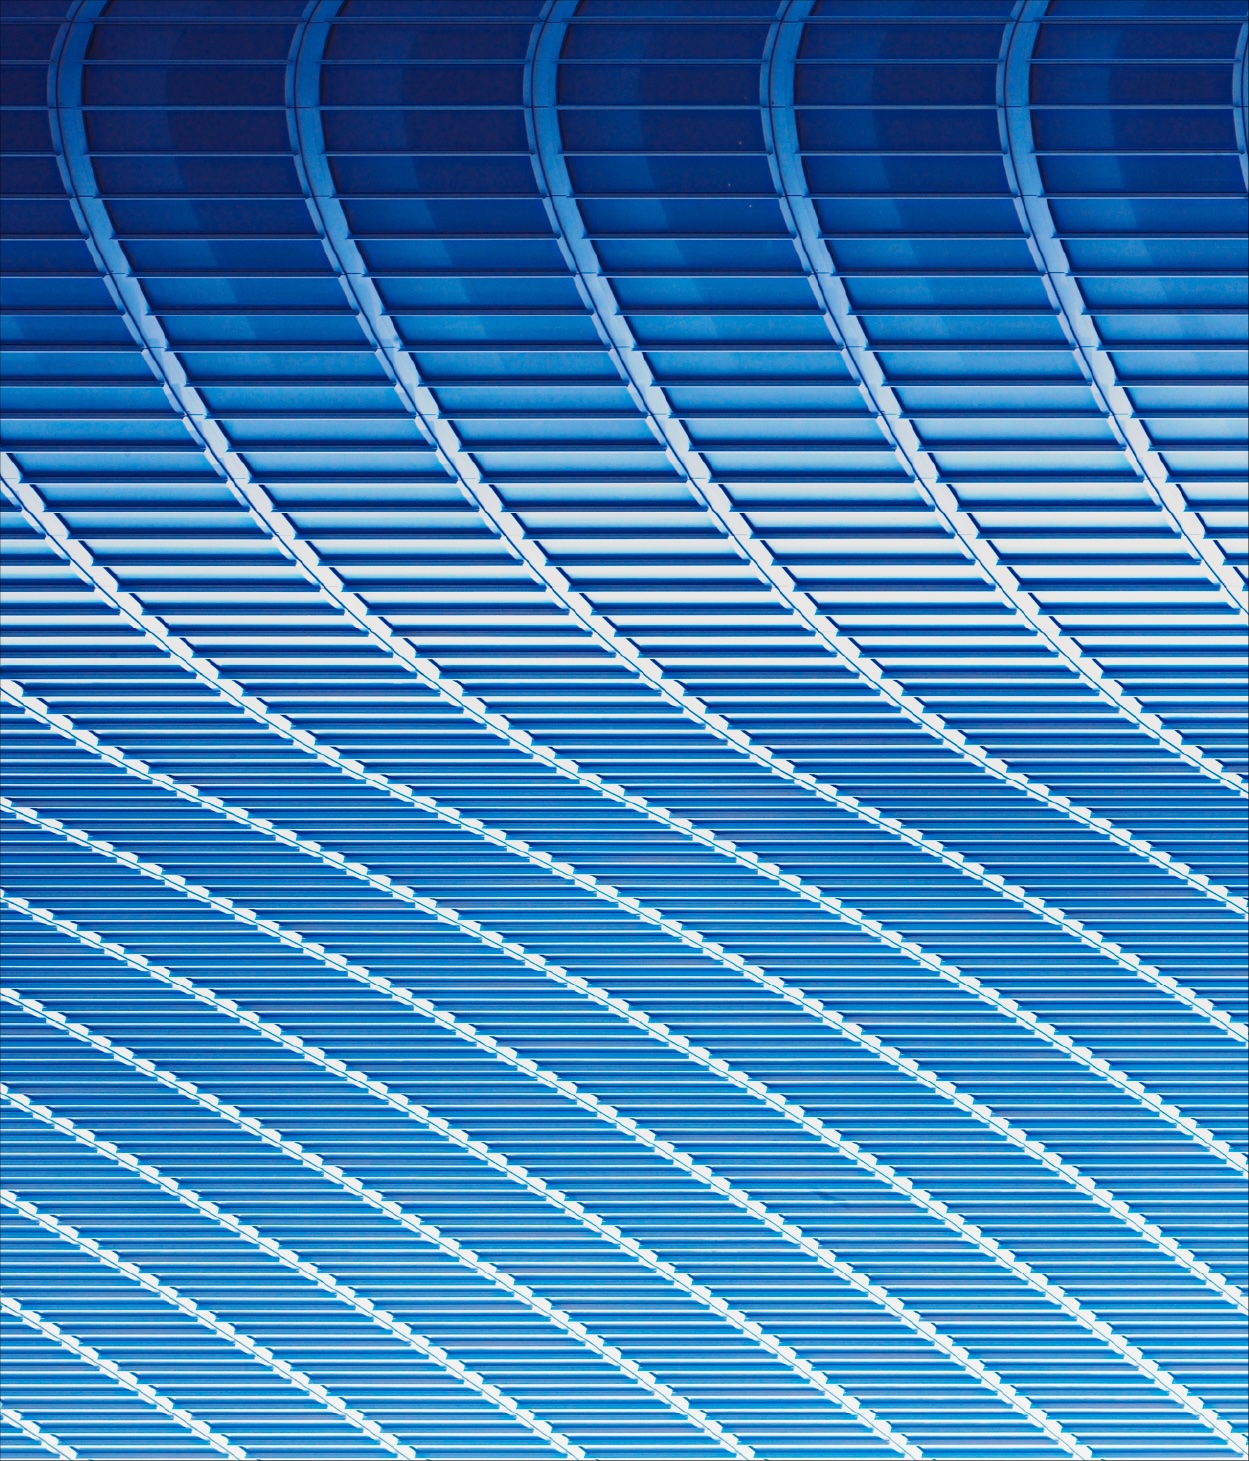 Photo of the curved surface of a blue-tiled office roof.